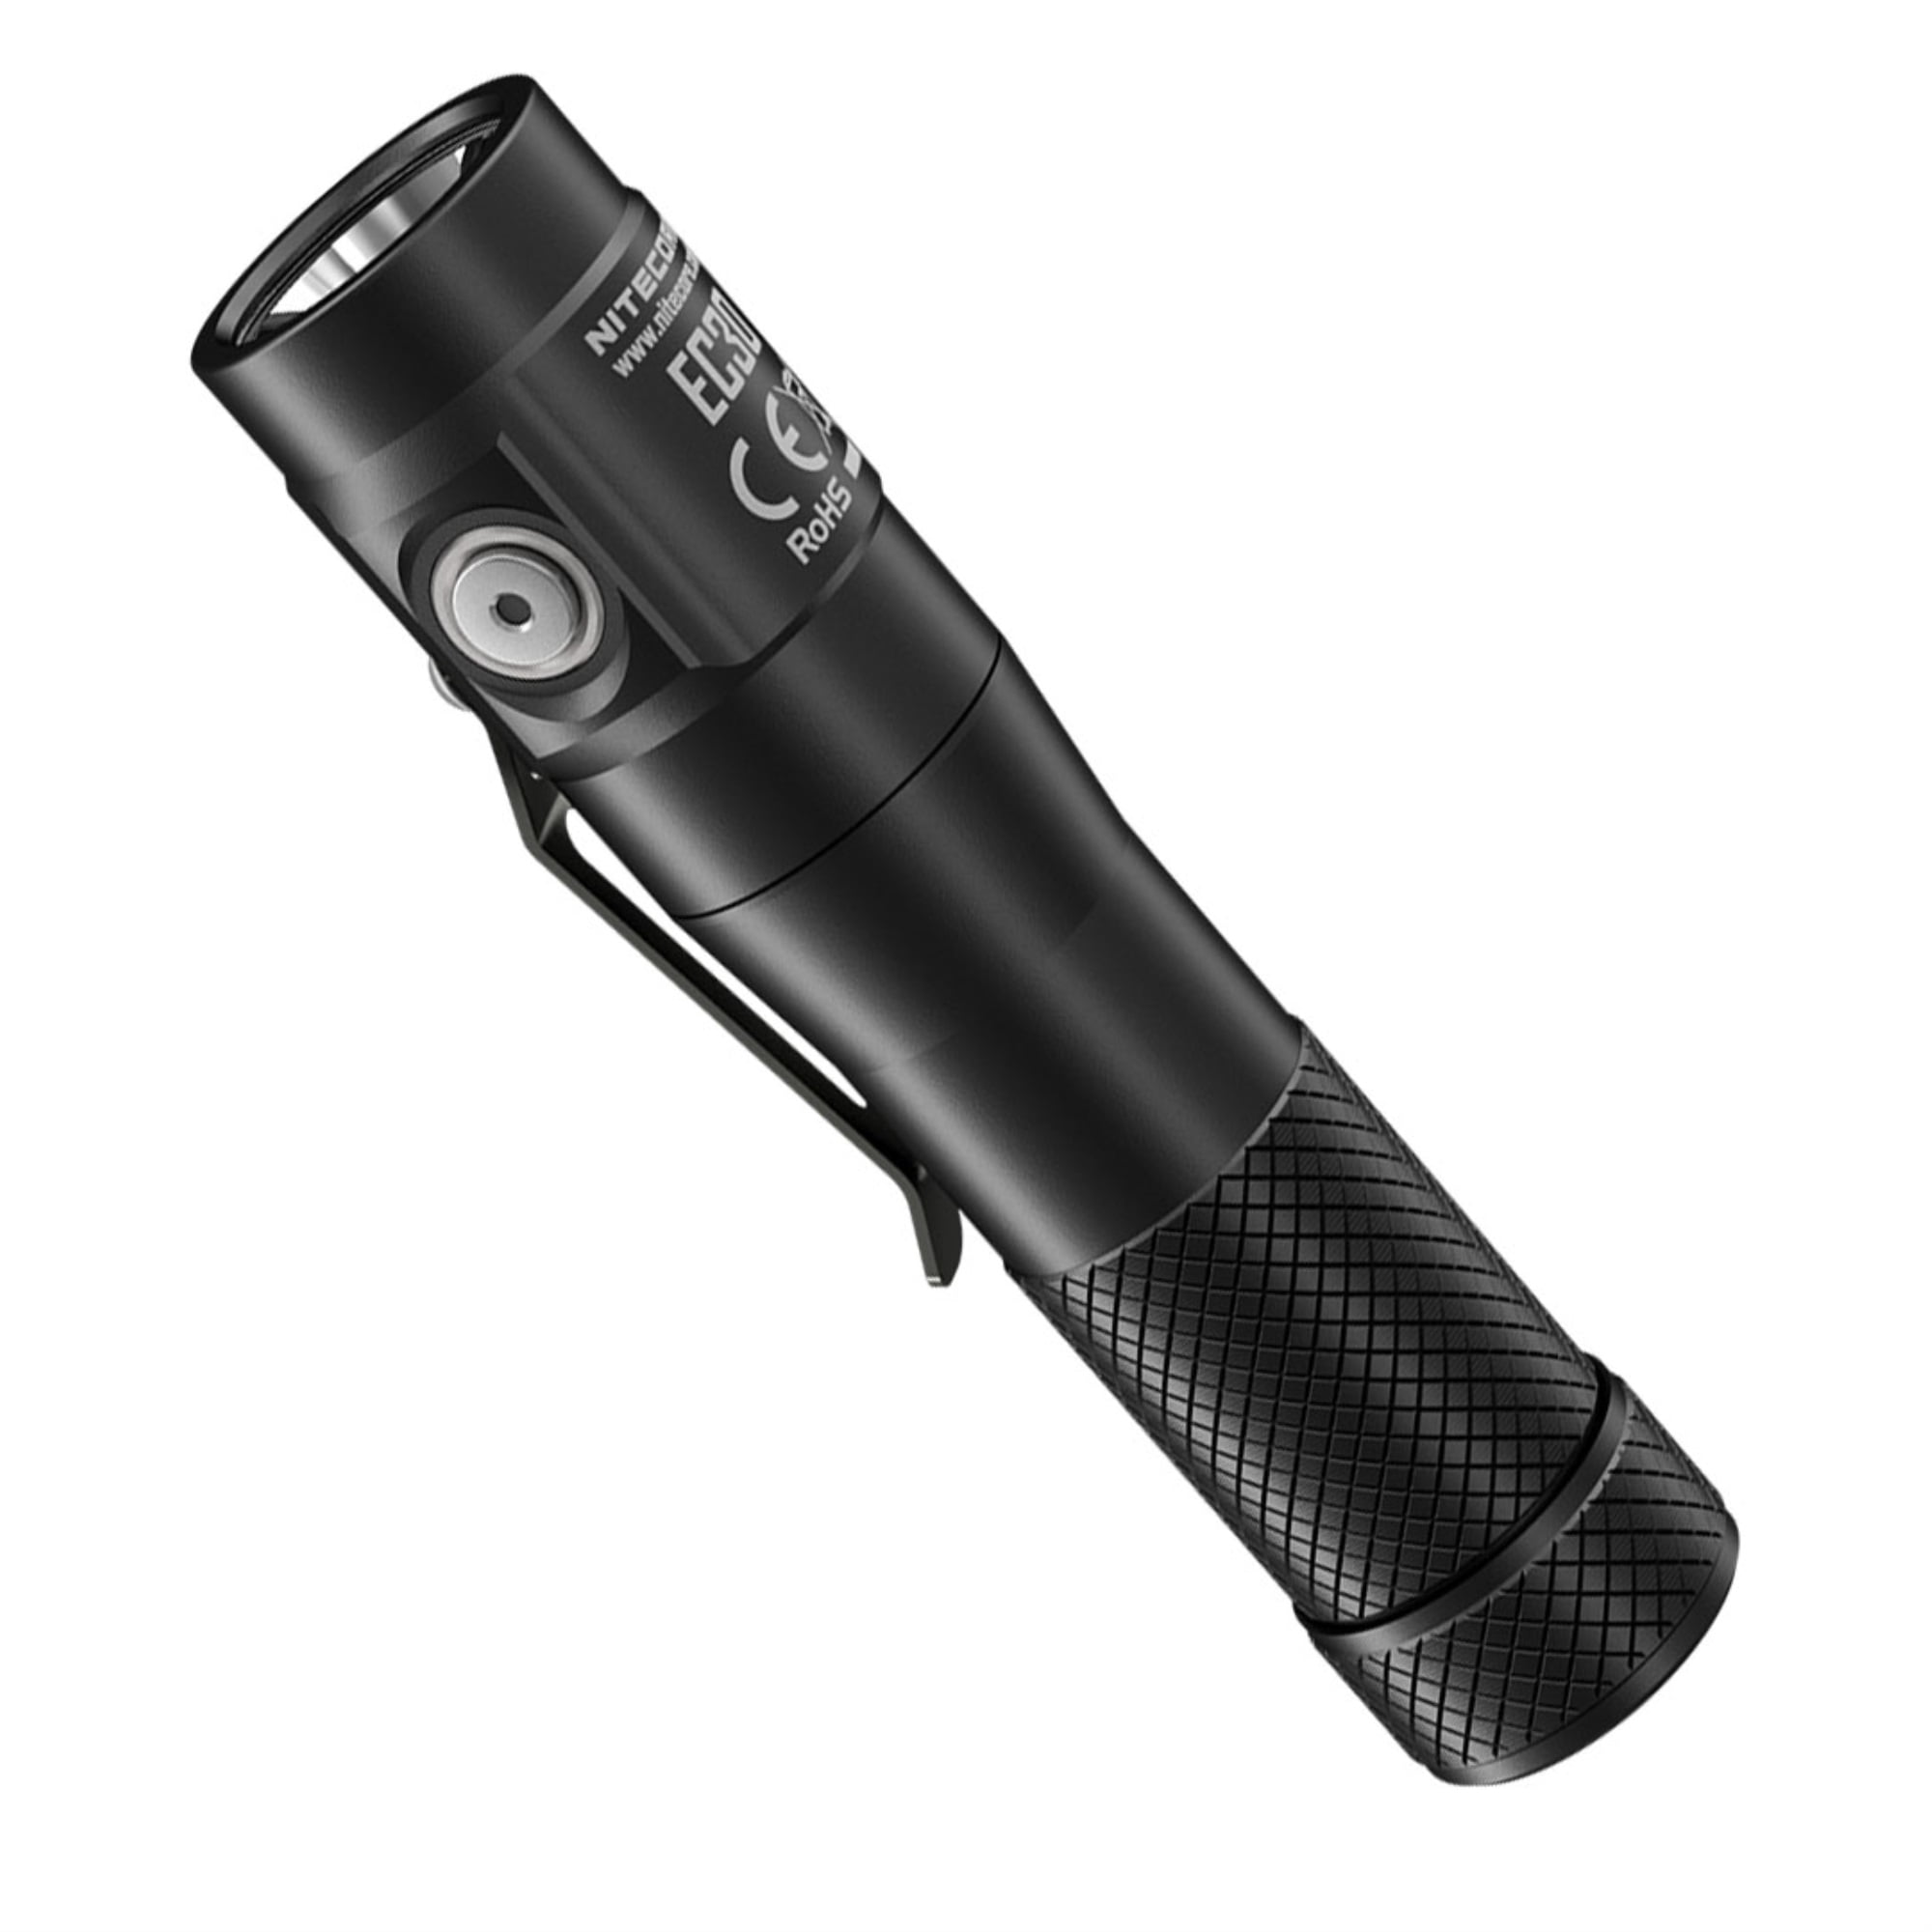 NITECORE EC30 1800 Lumen Ultra Compact Flashlight with Rechargeable Battery 